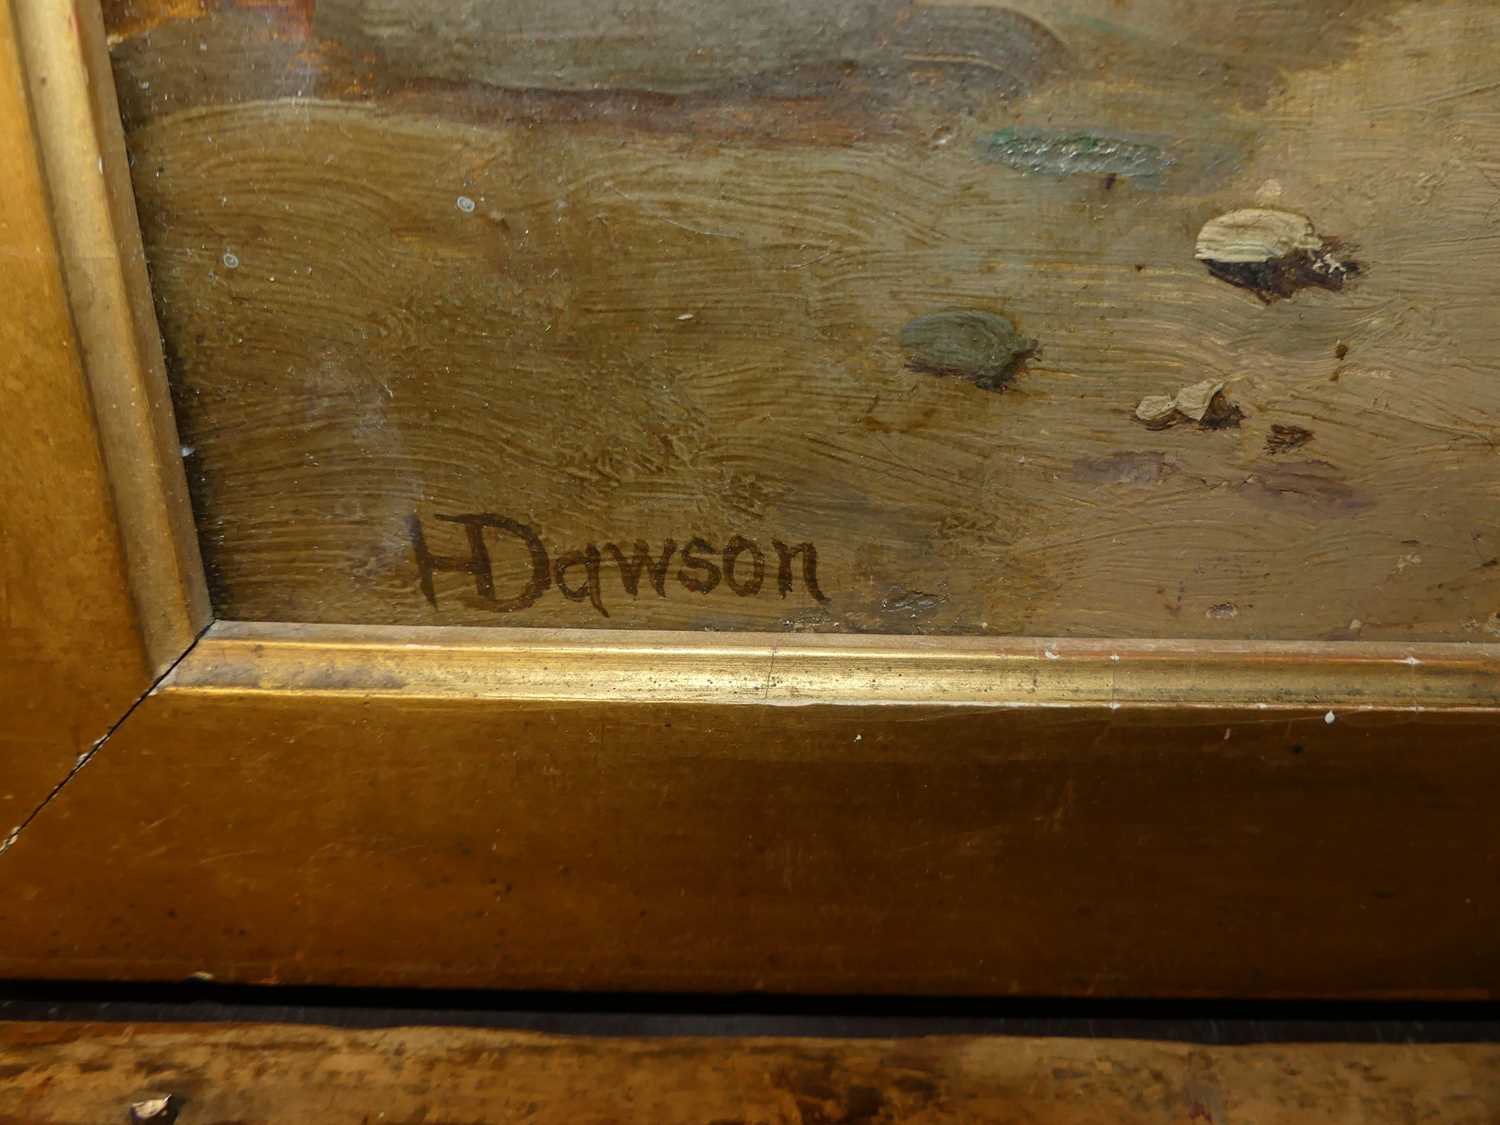 H Dawson - Milking time, oil on canvas, signed lower left, 32 x 59cm - Image 4 of 5